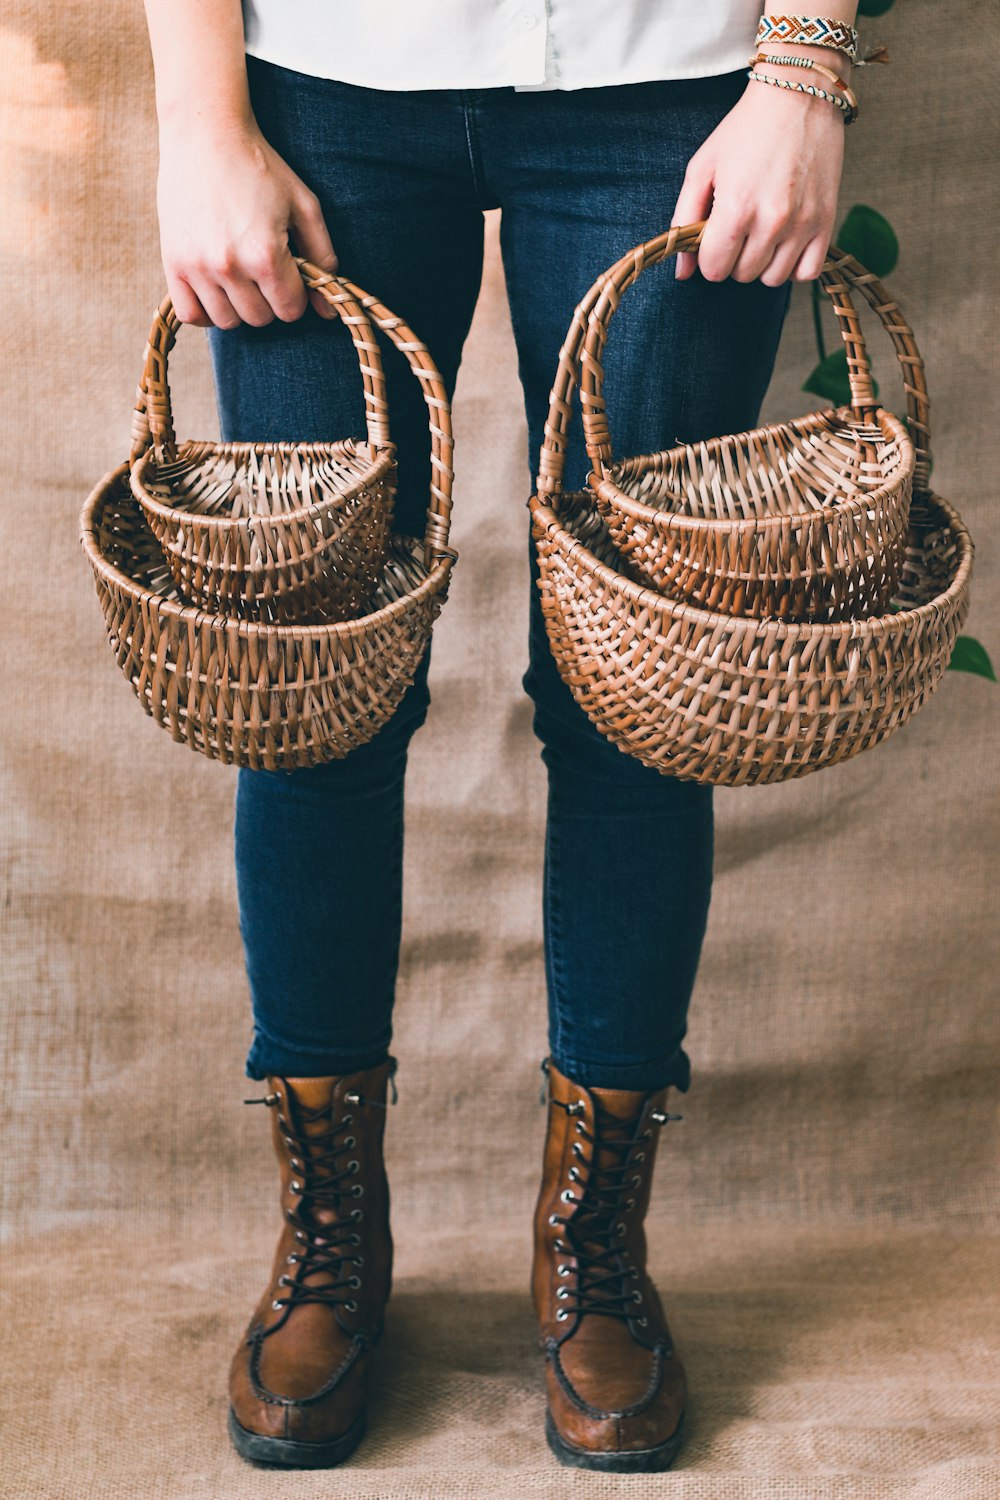 person in blue denim jeans holding brown woven basket